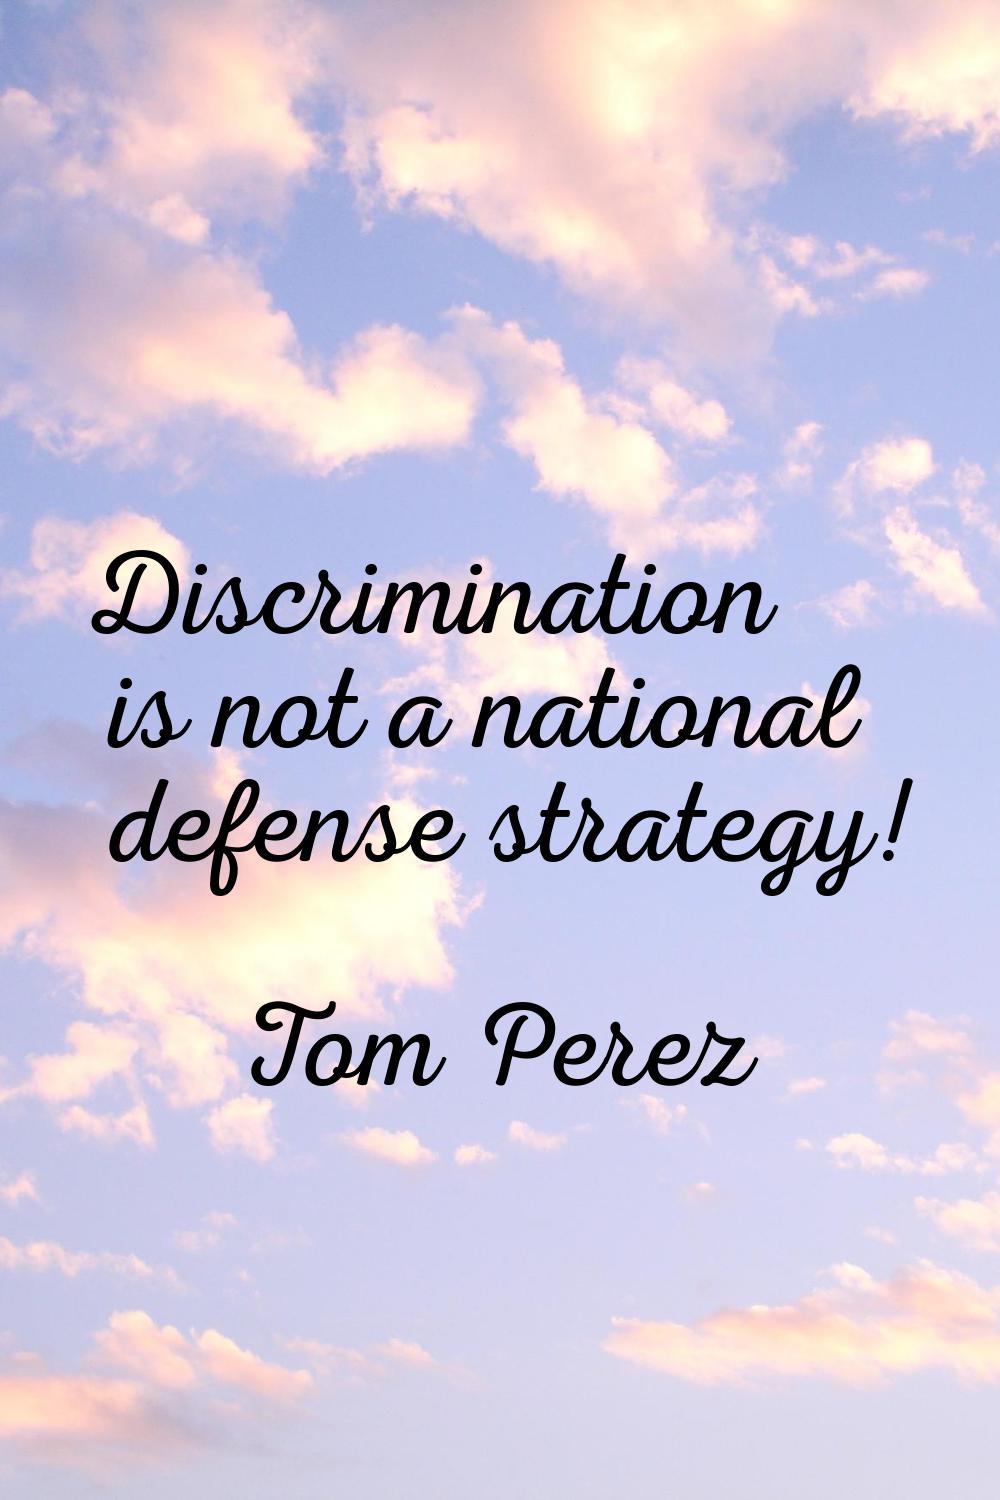 Discrimination is not a national defense strategy!